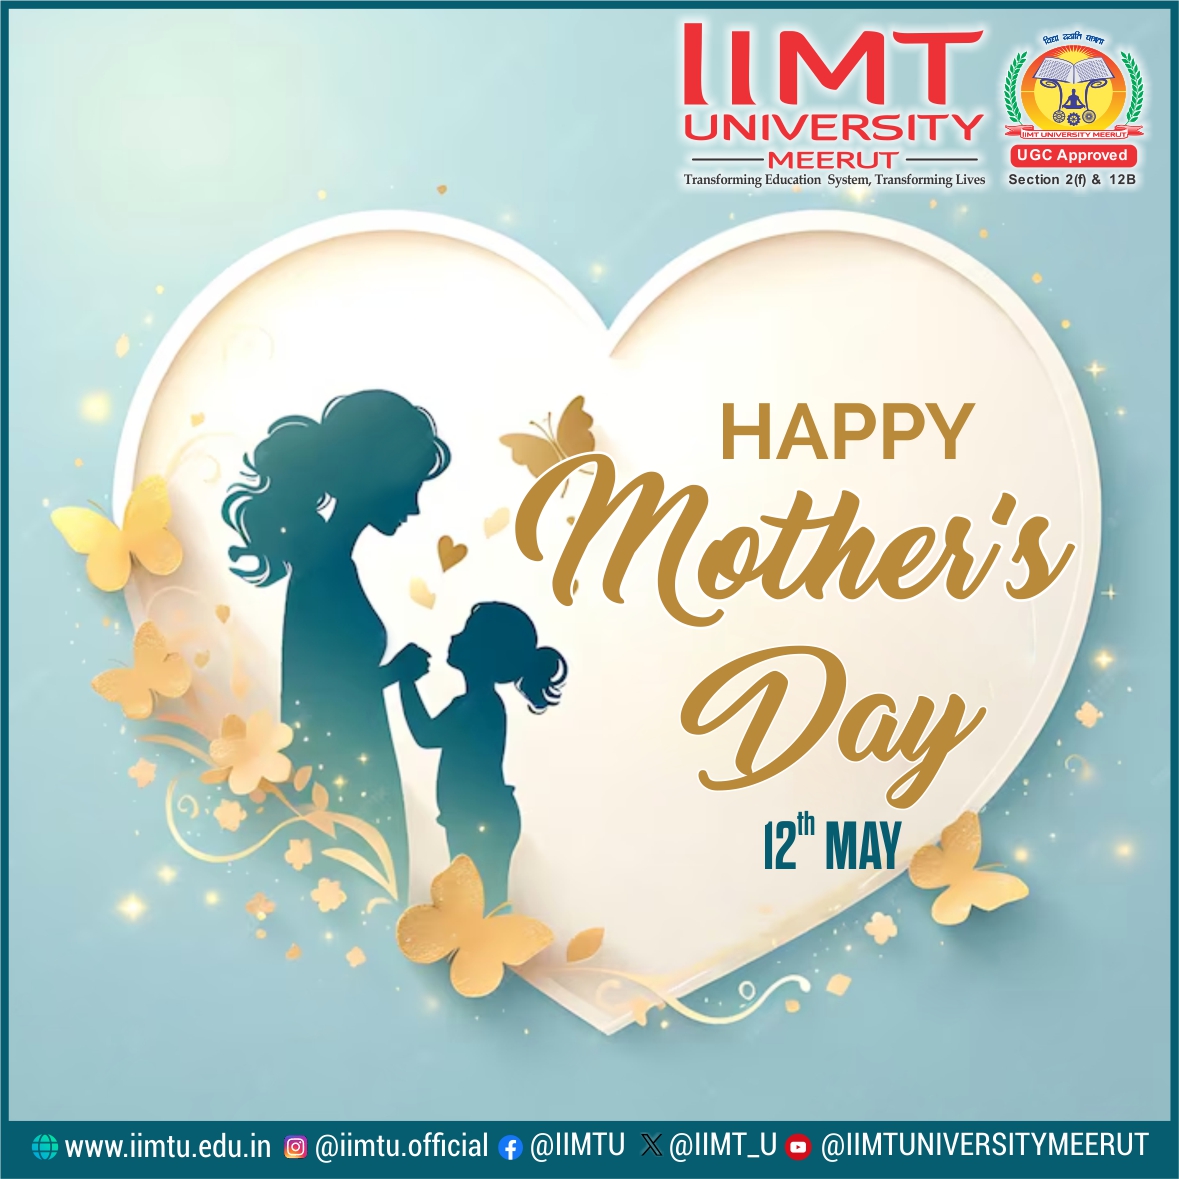 MOM’ is the reflection of ‘WOW’ 
Mother is the sacred place where the heart finds peace. Happy Mother's Day! 

#mothersday #motherlove #motherblessings 

#IIMTU #TransformingEducationSystem #TransformingLives

#AdmissionsOpen2024 #UniversityAdmissions #CollegeAdmissions